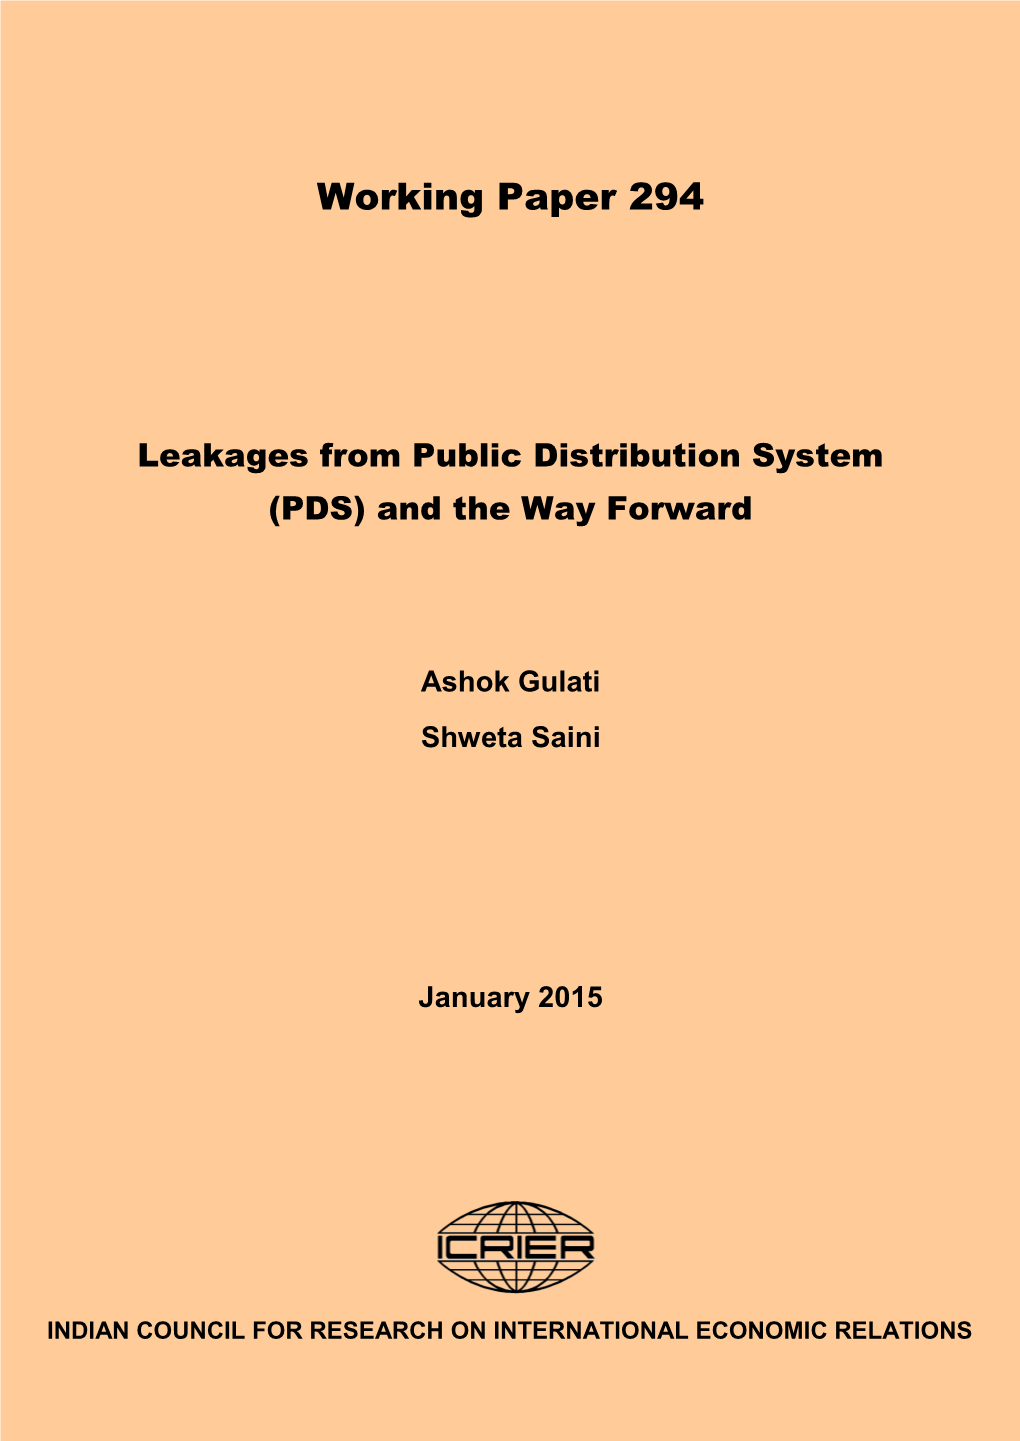 Leakages from Public Distribution System (PDS) and the Way Forward